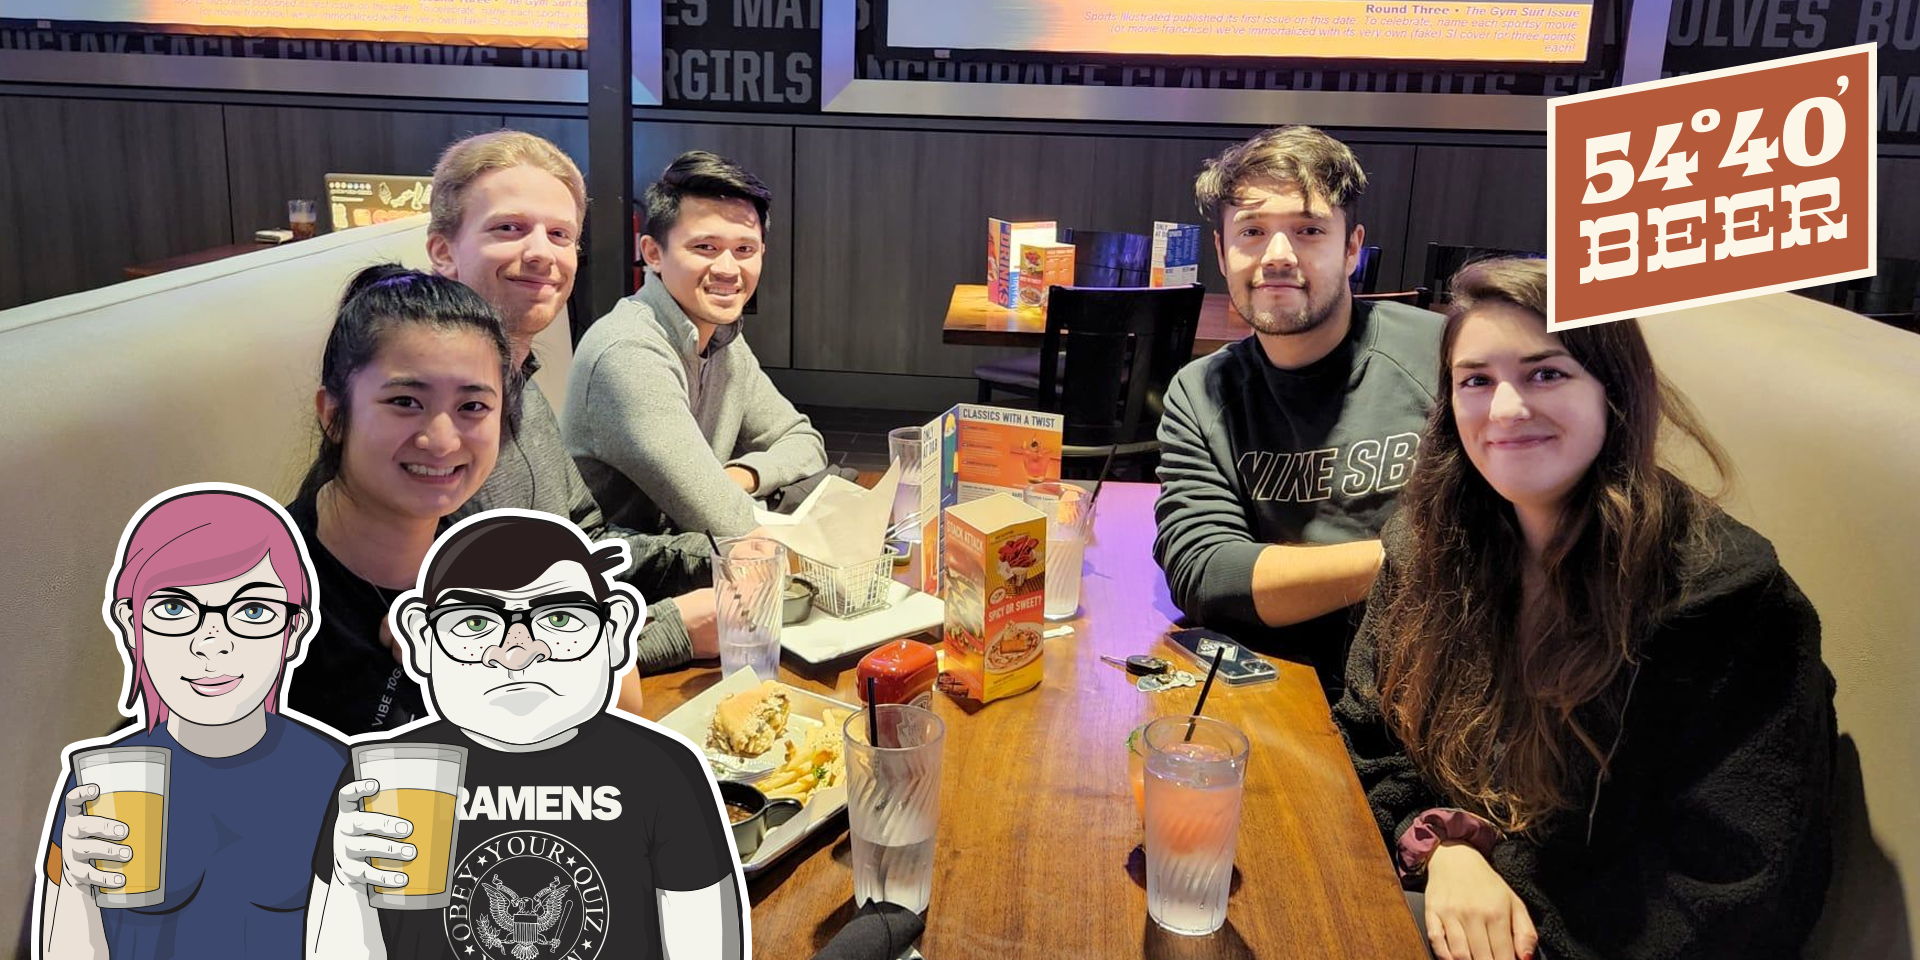 Geeks Who Drink Trivia Night at 54-40 Brewing! promotional image